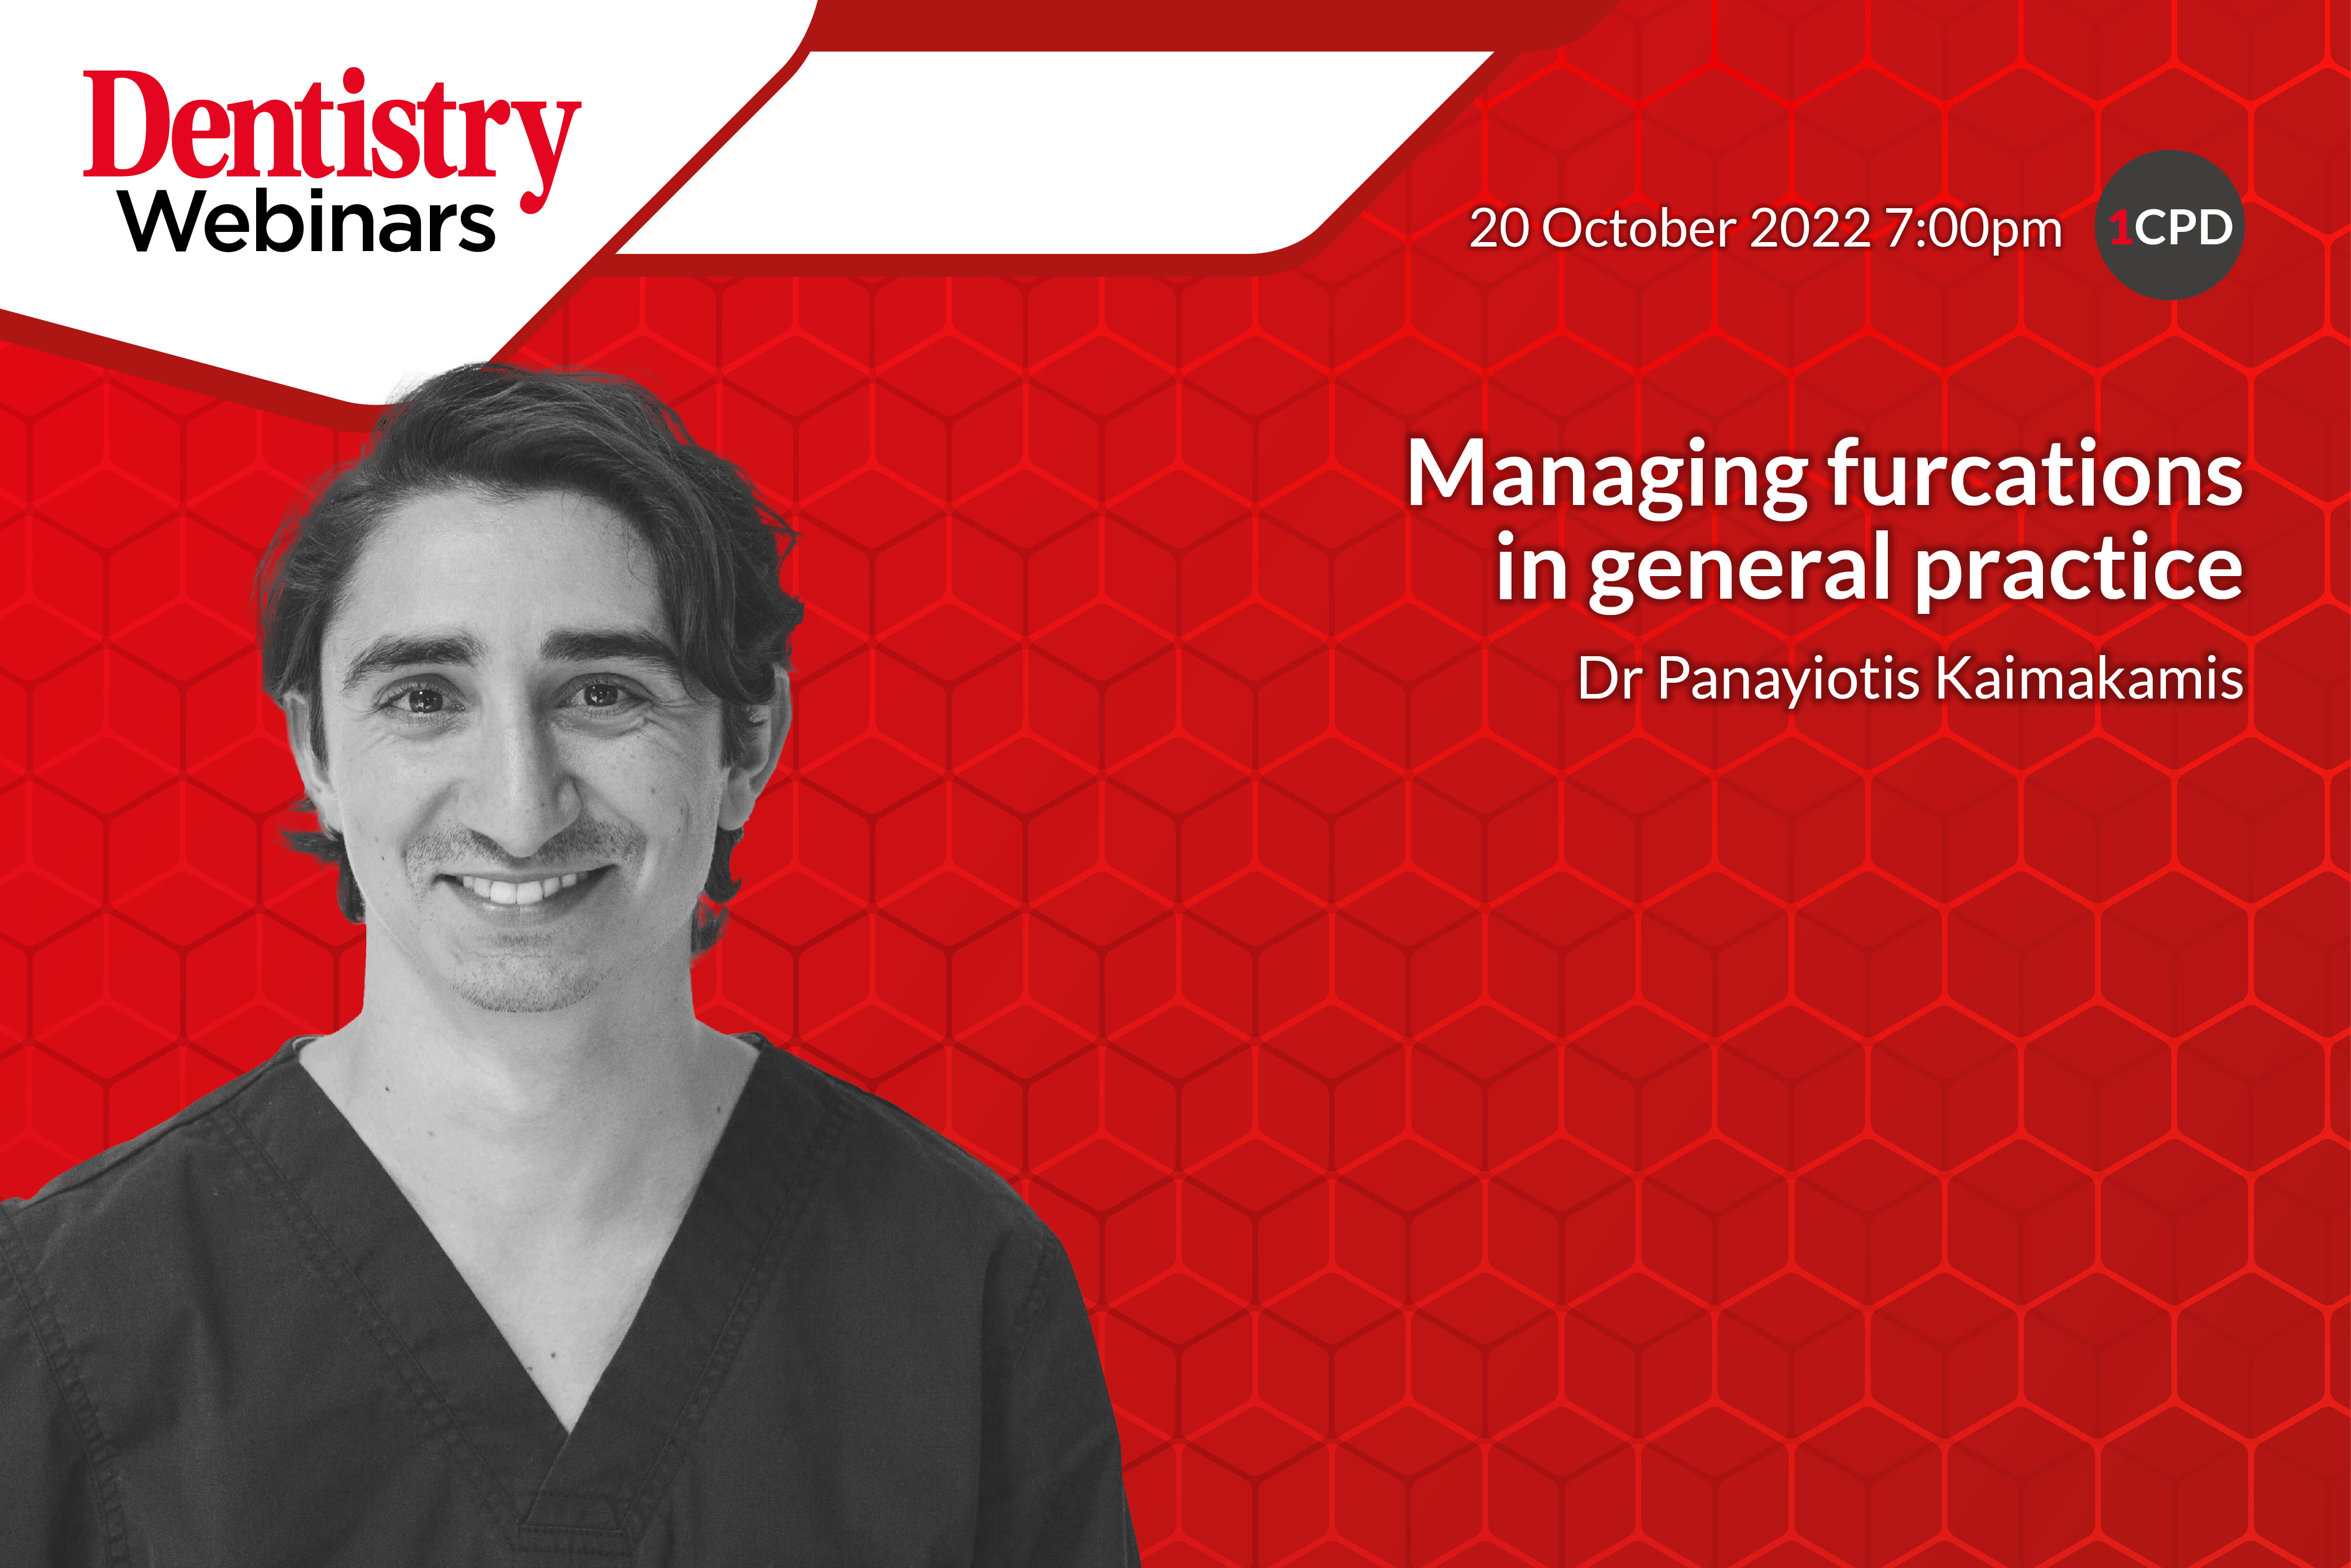 Join Dr Pano Kaimakamis on Thursday 20 October at 7pm as he discusses managing furcations in general practice – register now. 